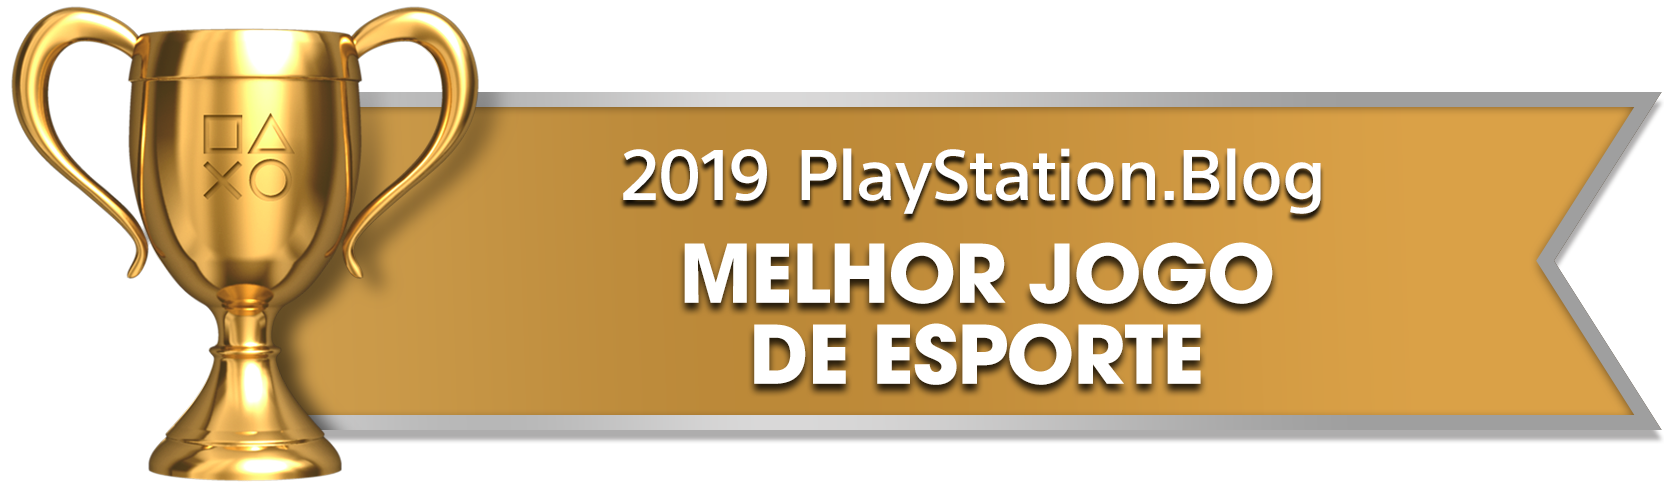 PS Blog Game of the Year 2019 - Best Sports Game - 2 - Gold